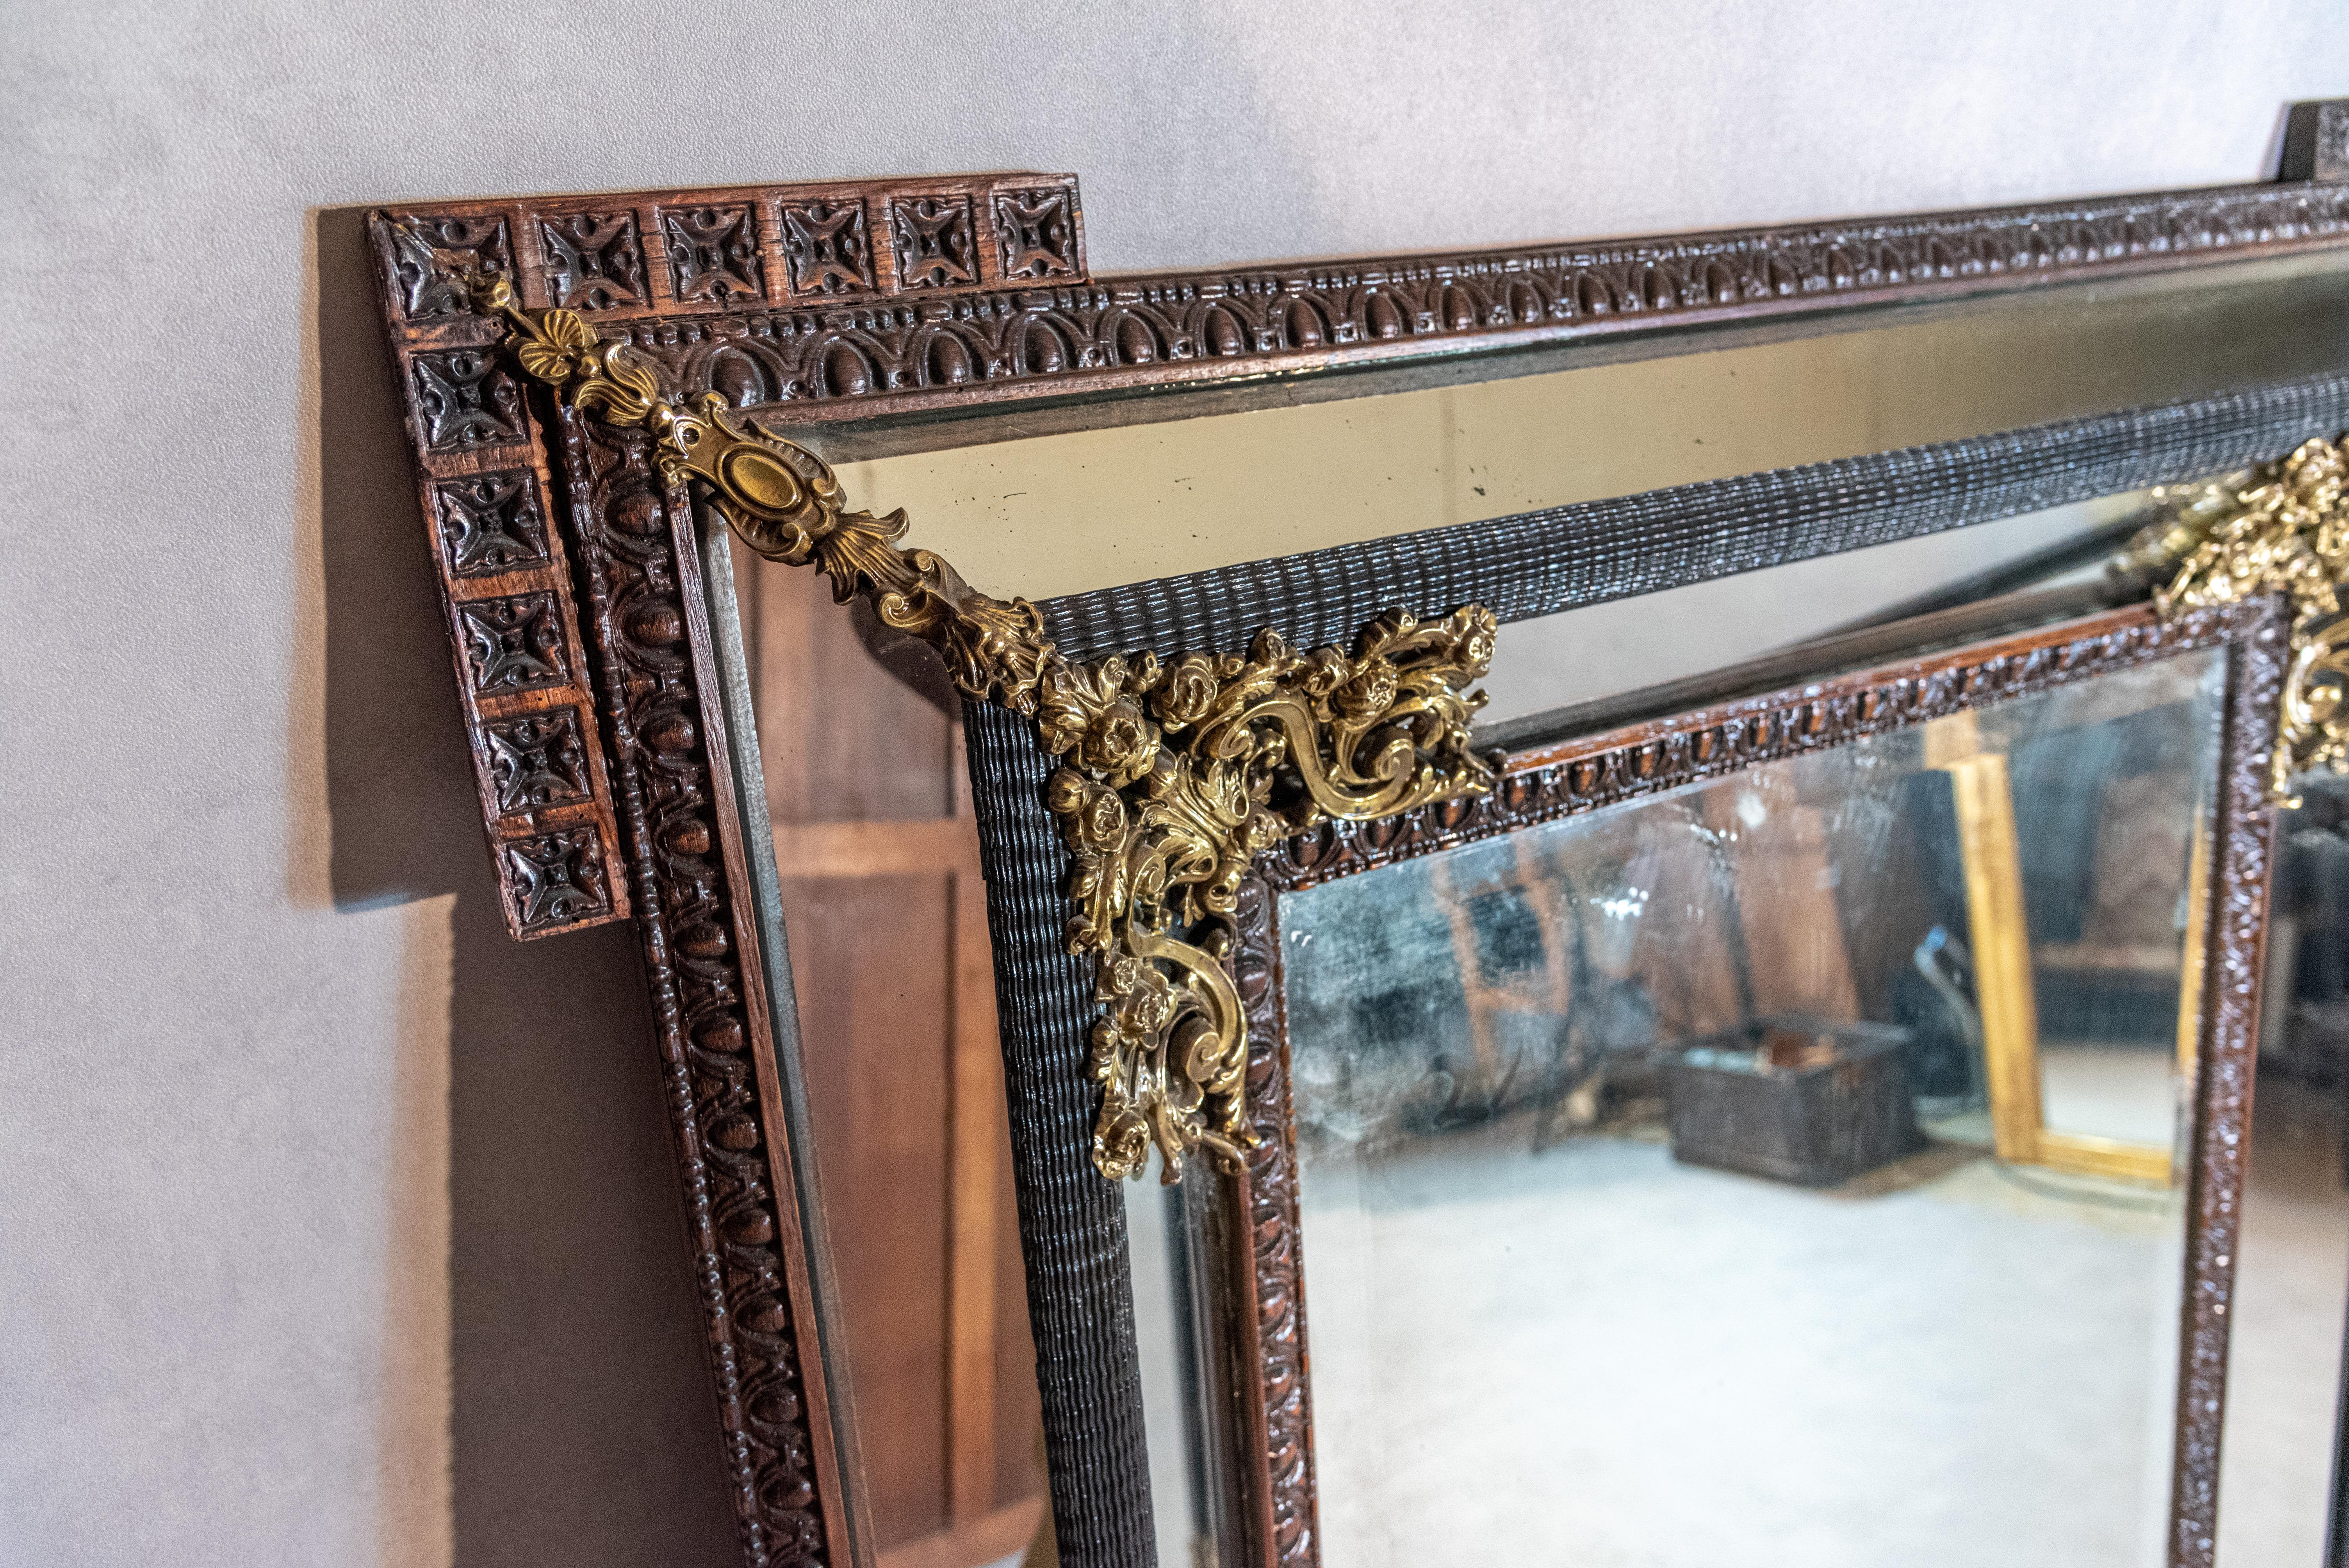 A unique 19th century French Napoleon III style parecloses mirror with beautiful proportions and a unique frame design. This authentic mirror features wonderful brass ornamentations and finishes, stunning wood carvings, and a mirror glass in fine